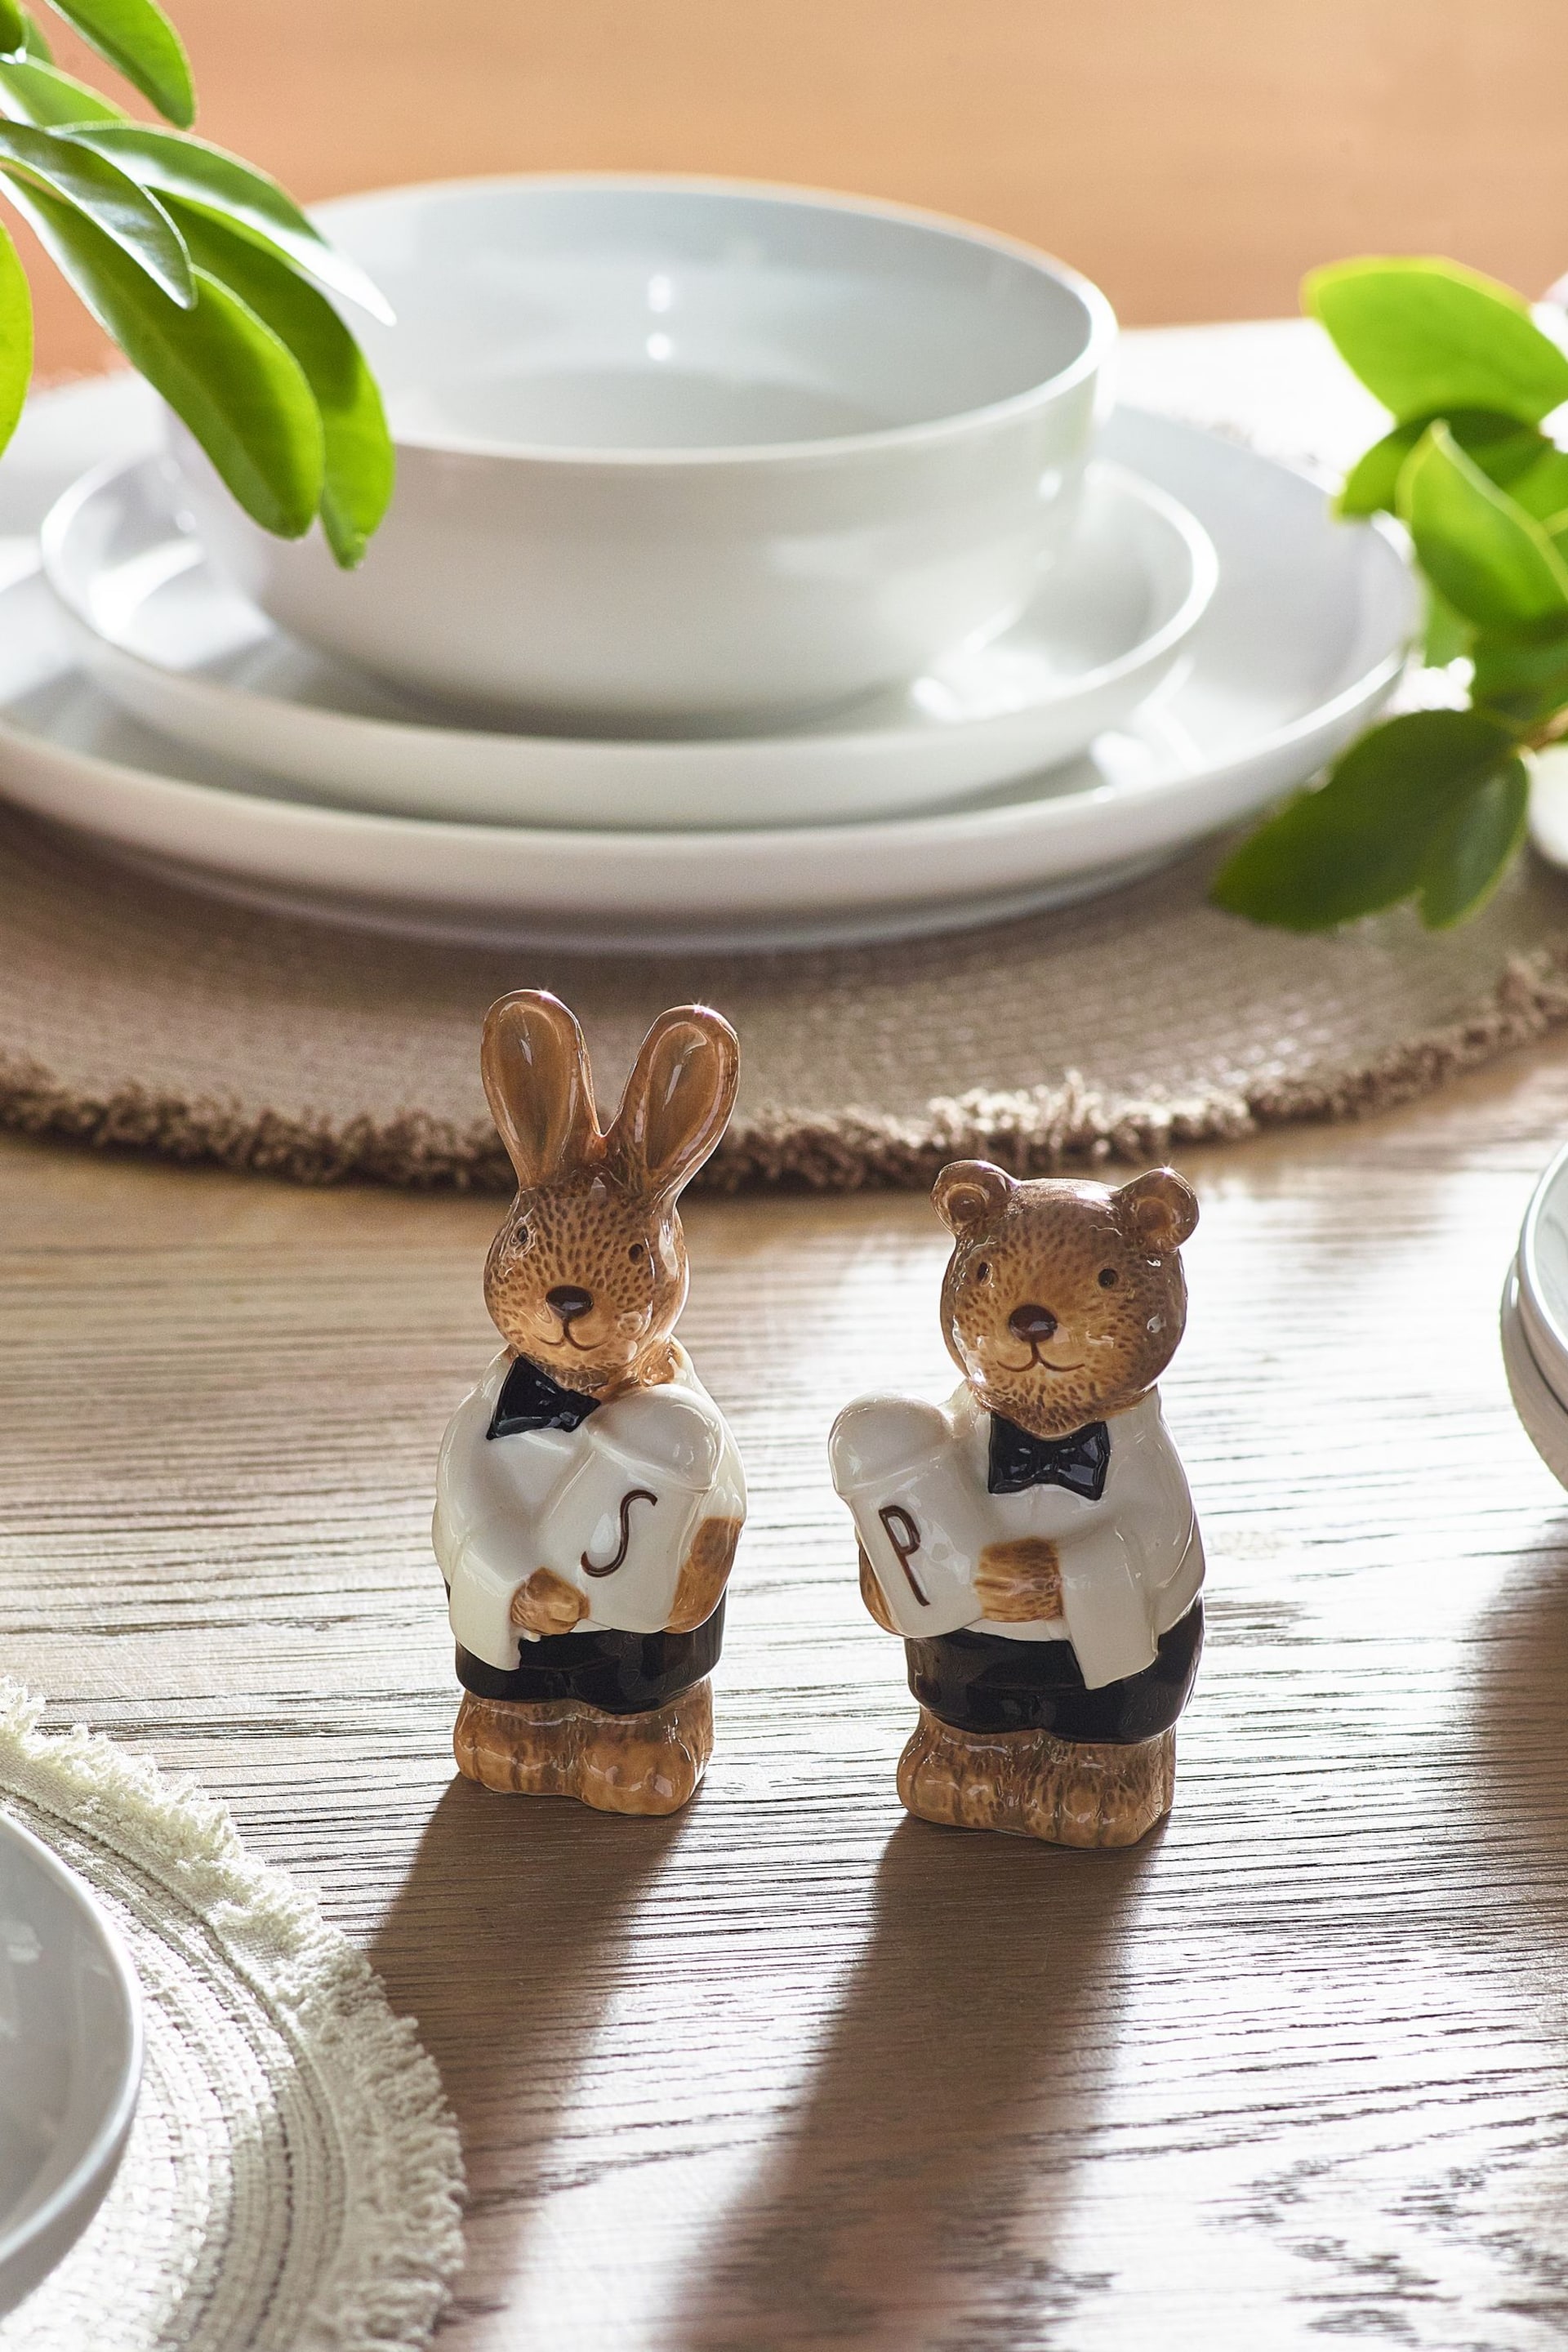 Natural Bunny and Bear Salt and Pepper Shaker Set - Image 1 of 4